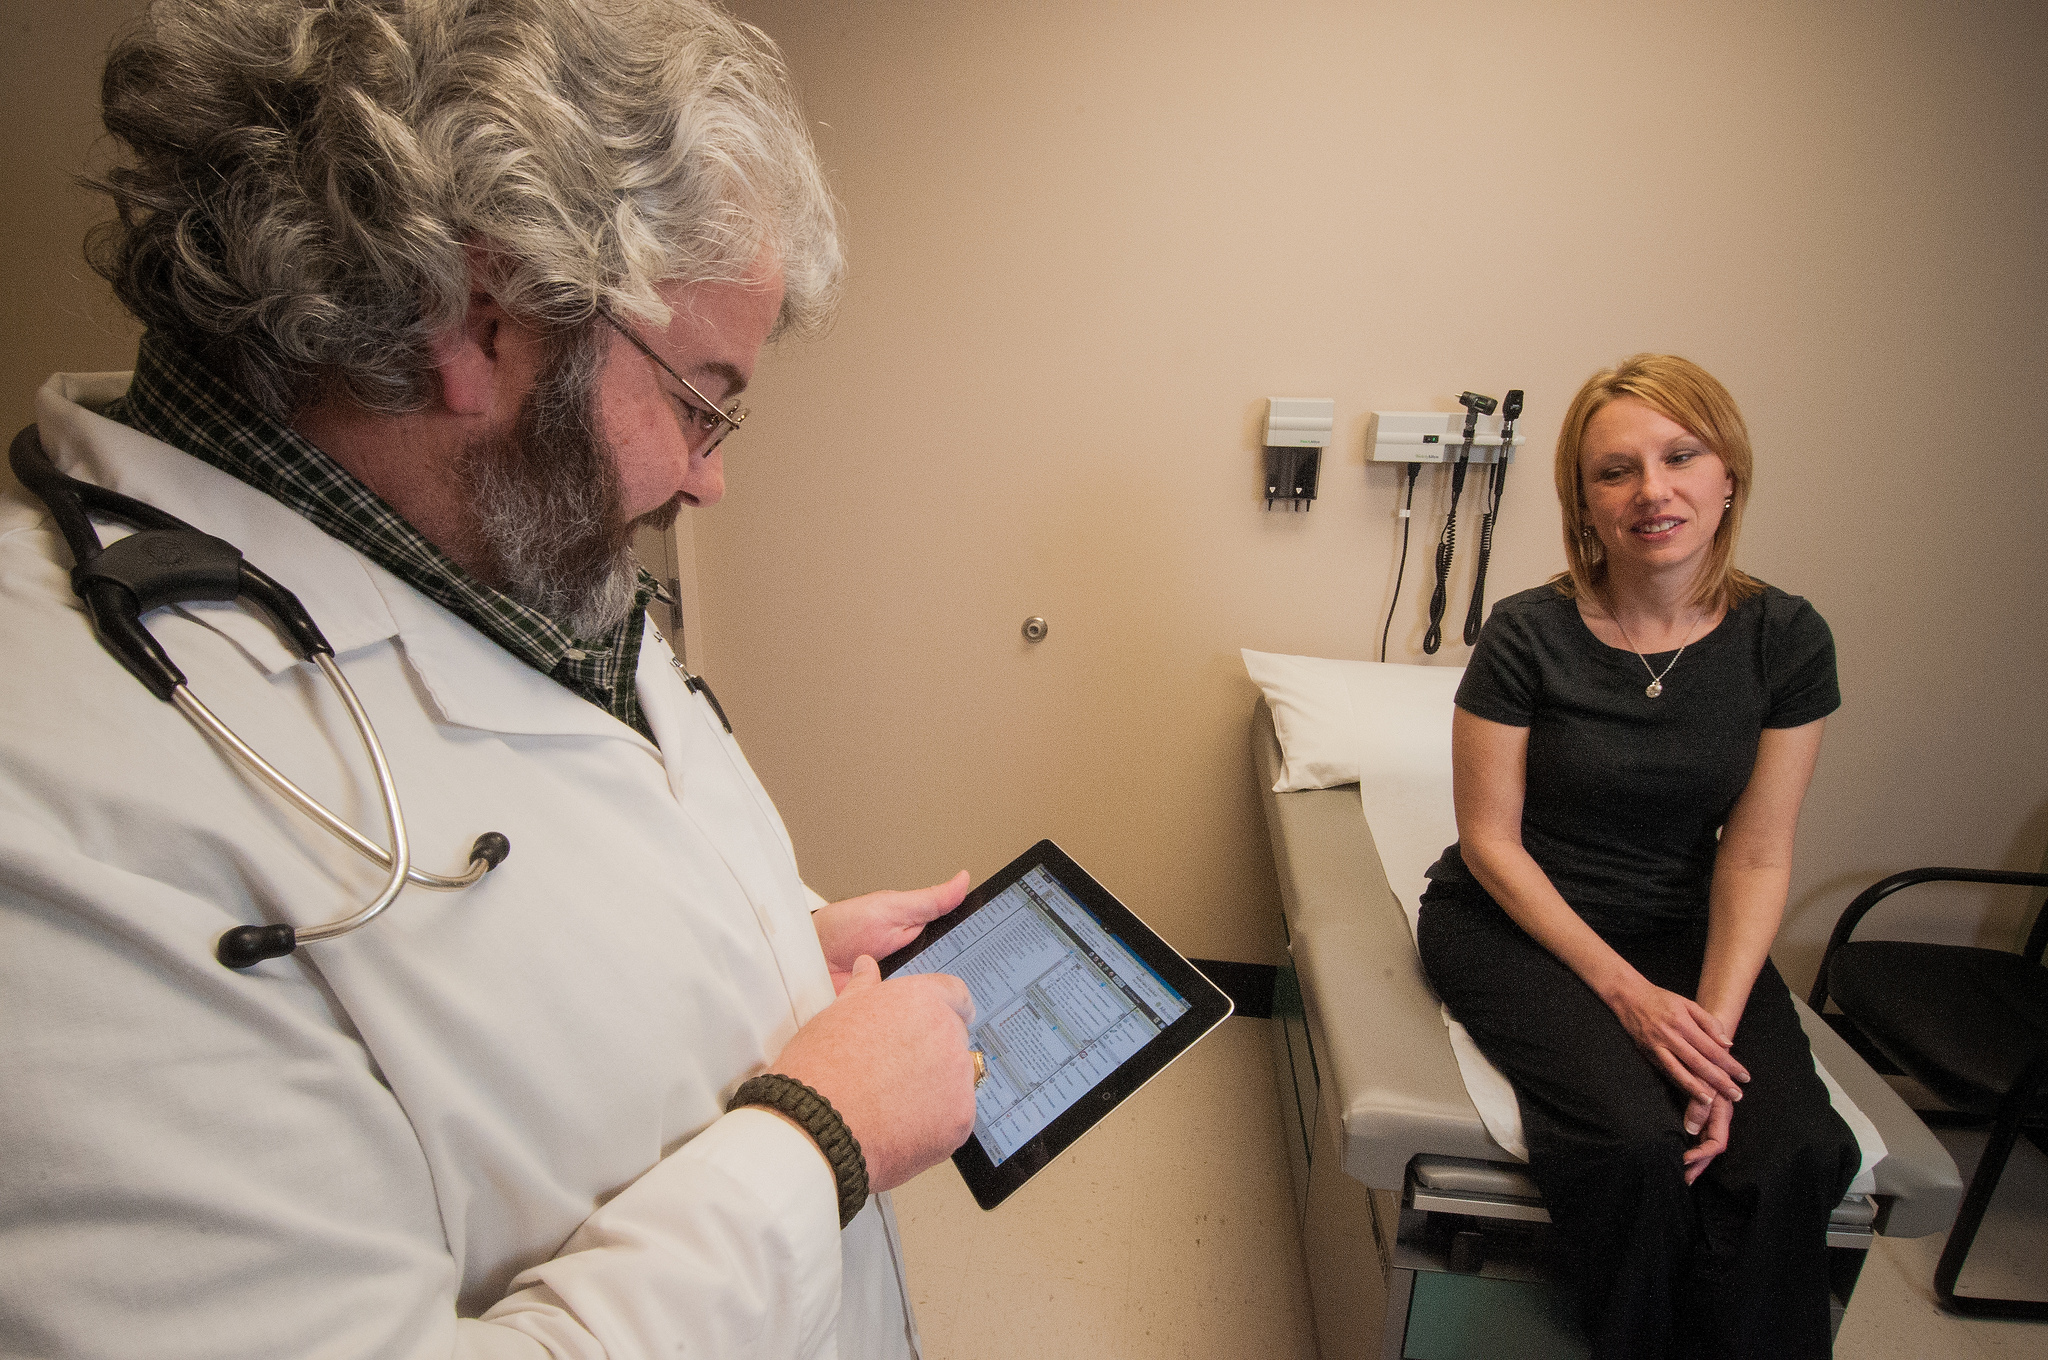 Dr. Albert Warren, MD consults with a patient and records the patient’s symptoms on an electronic tablet